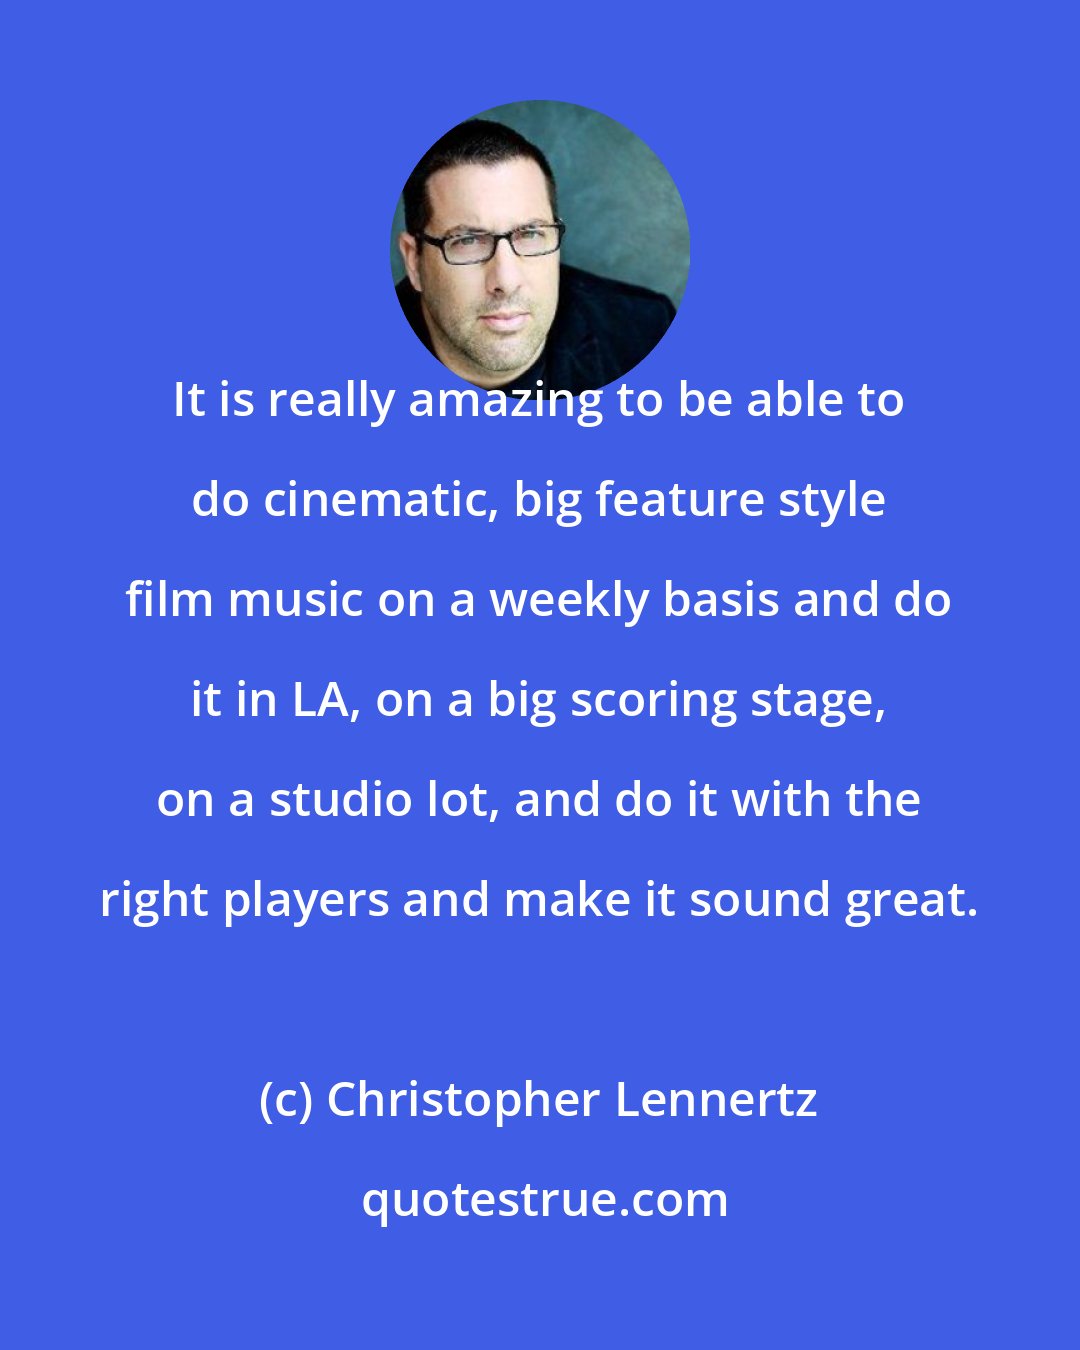 Christopher Lennertz: It is really amazing to be able to do cinematic, big feature style film music on a weekly basis and do it in LA, on a big scoring stage, on a studio lot, and do it with the right players and make it sound great.